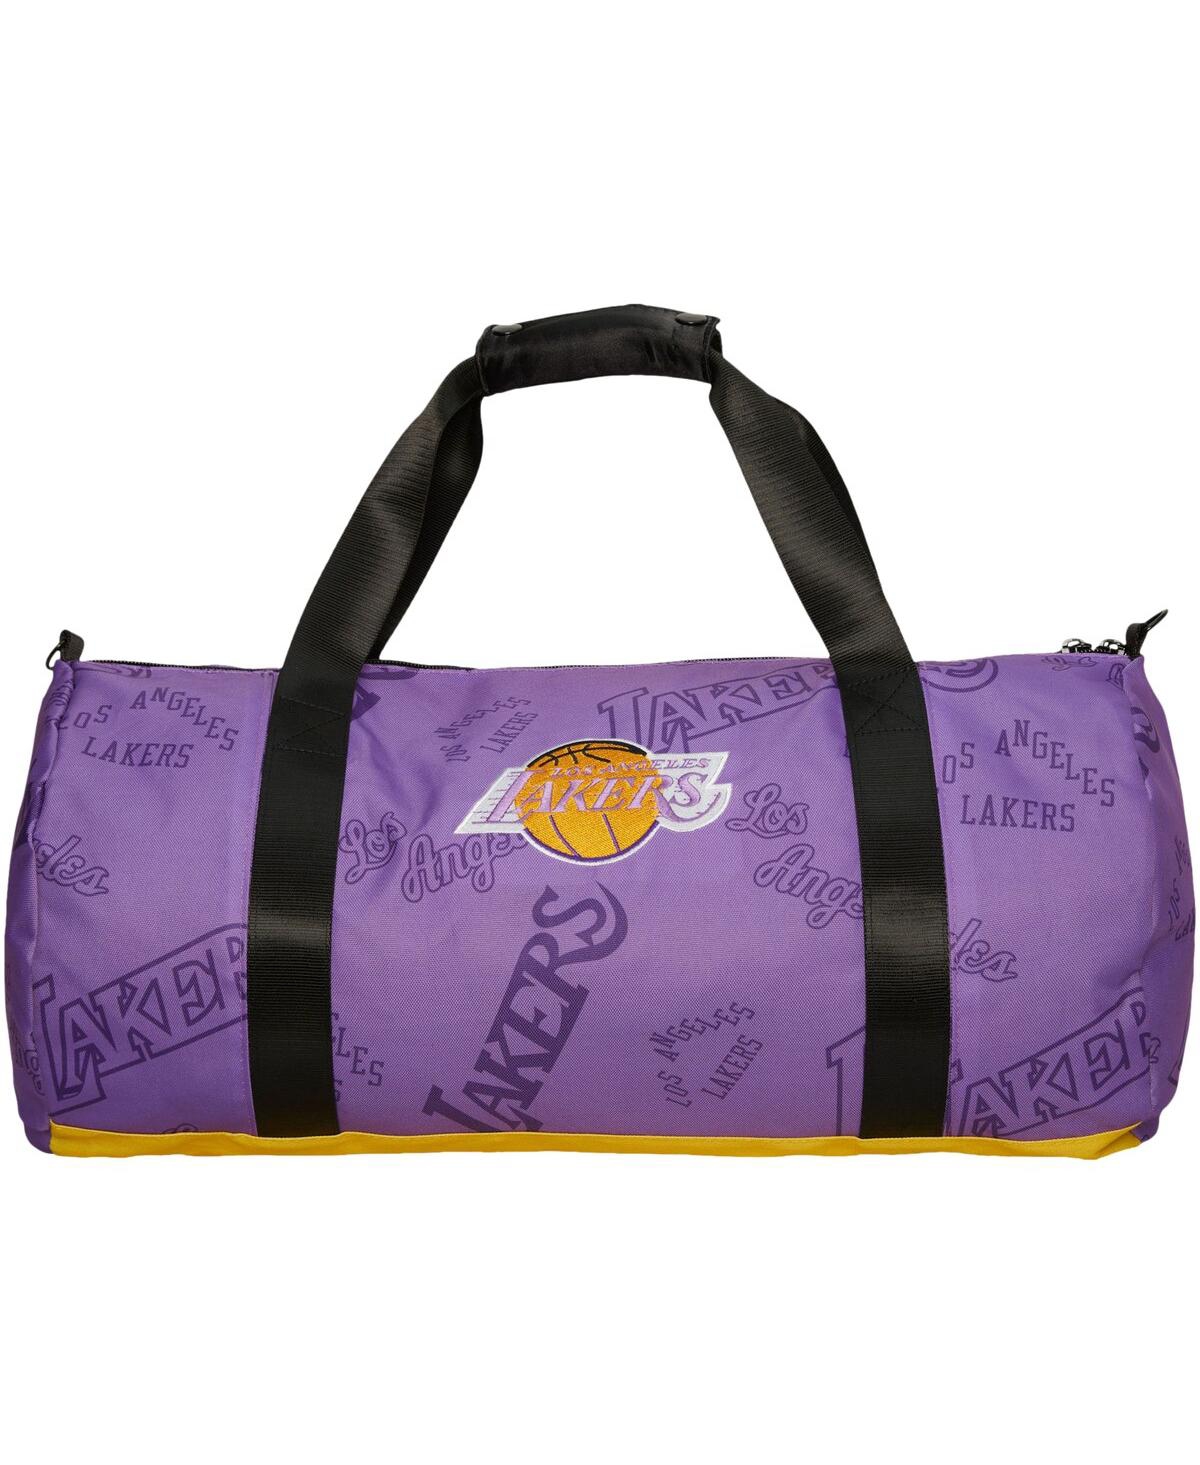 Men's and Women's Mitchell & Ness Los Angeles Lakers Team Logo Duffle Bag - Purple